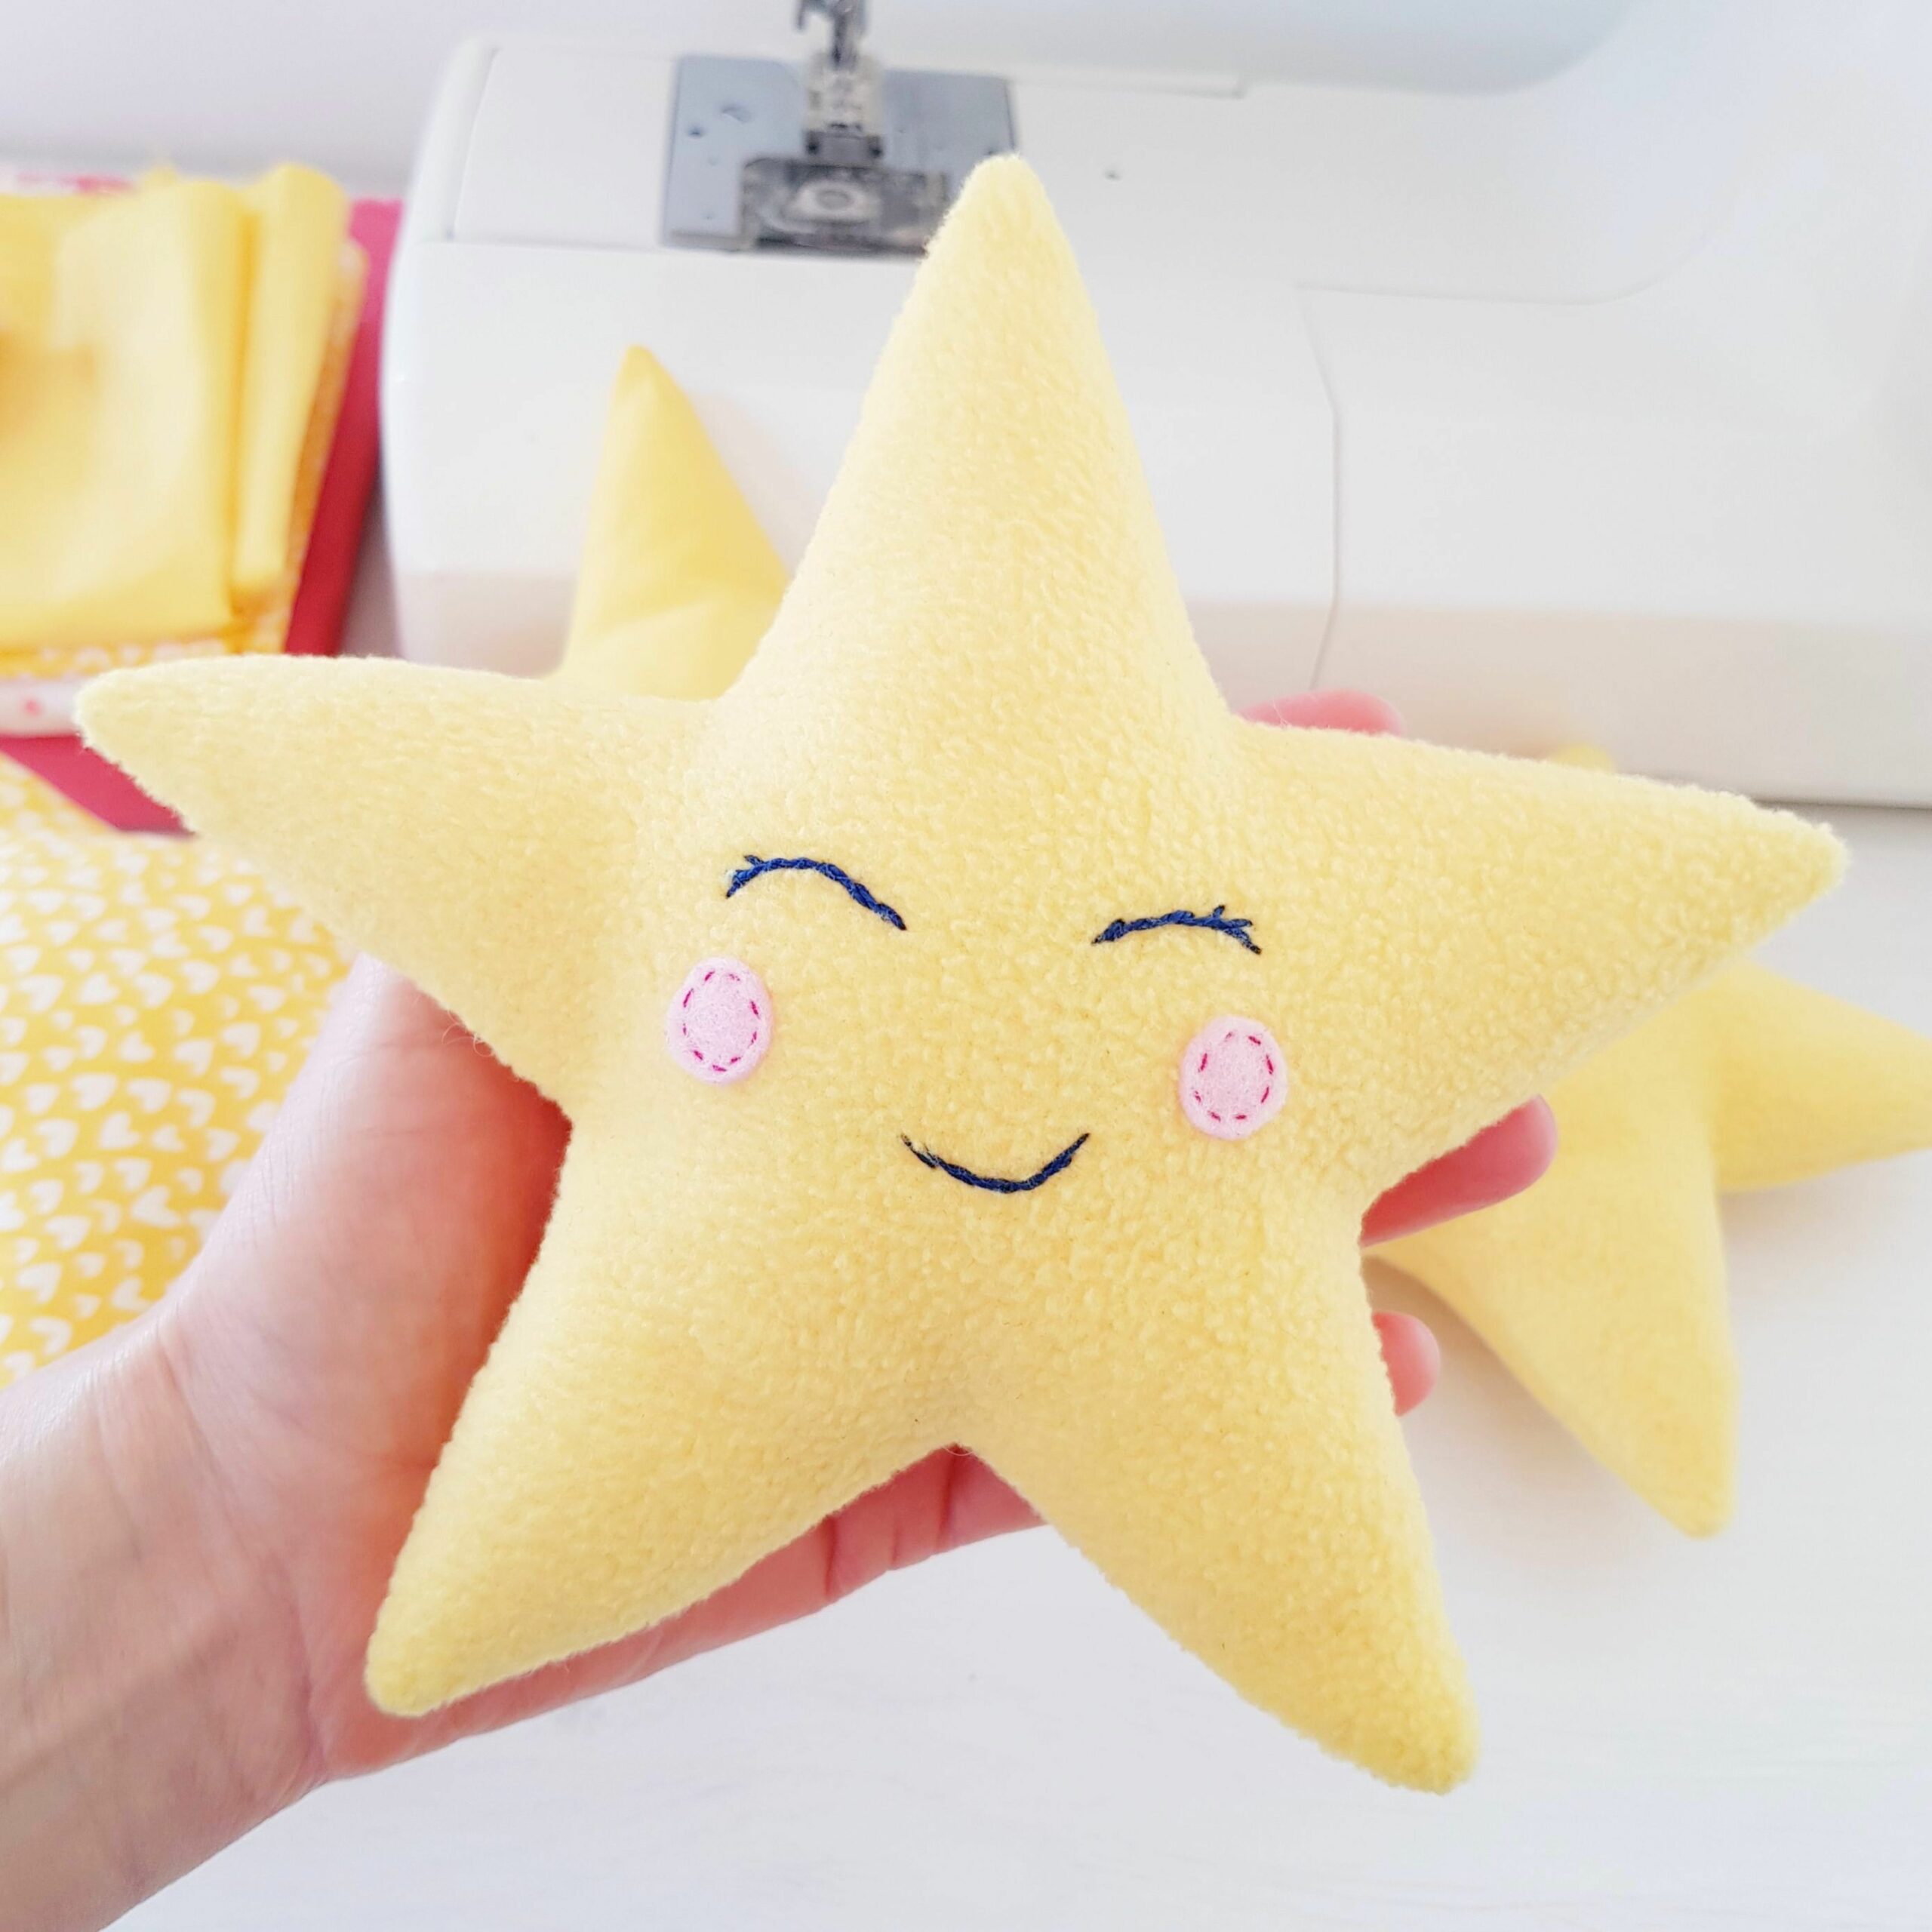 Baby Star pillow sewing pattern for beginners